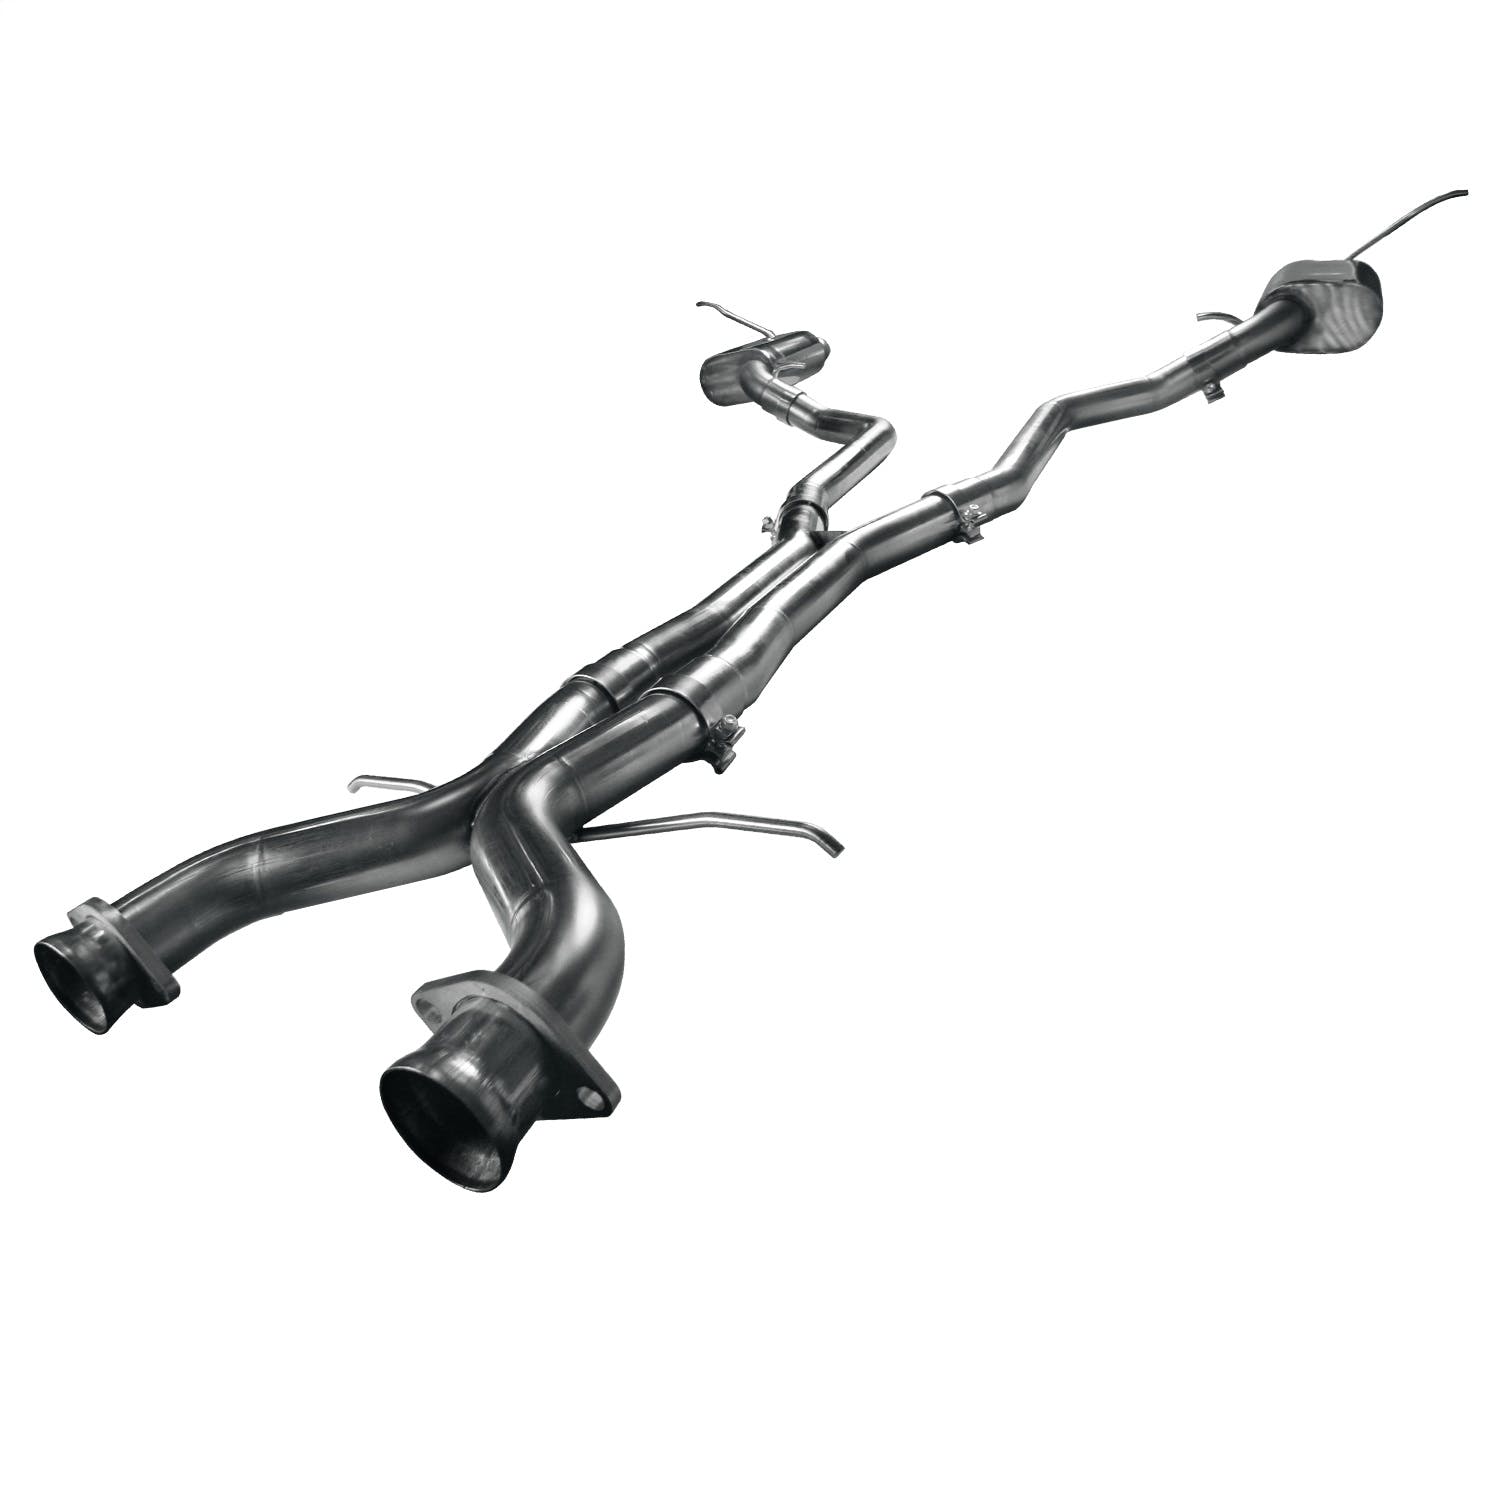 Kooks Custom Headers 34104250 3in. Cat Back Stainless Steel Exhaust System. Includes X-Pipe and Kooks Mufflers